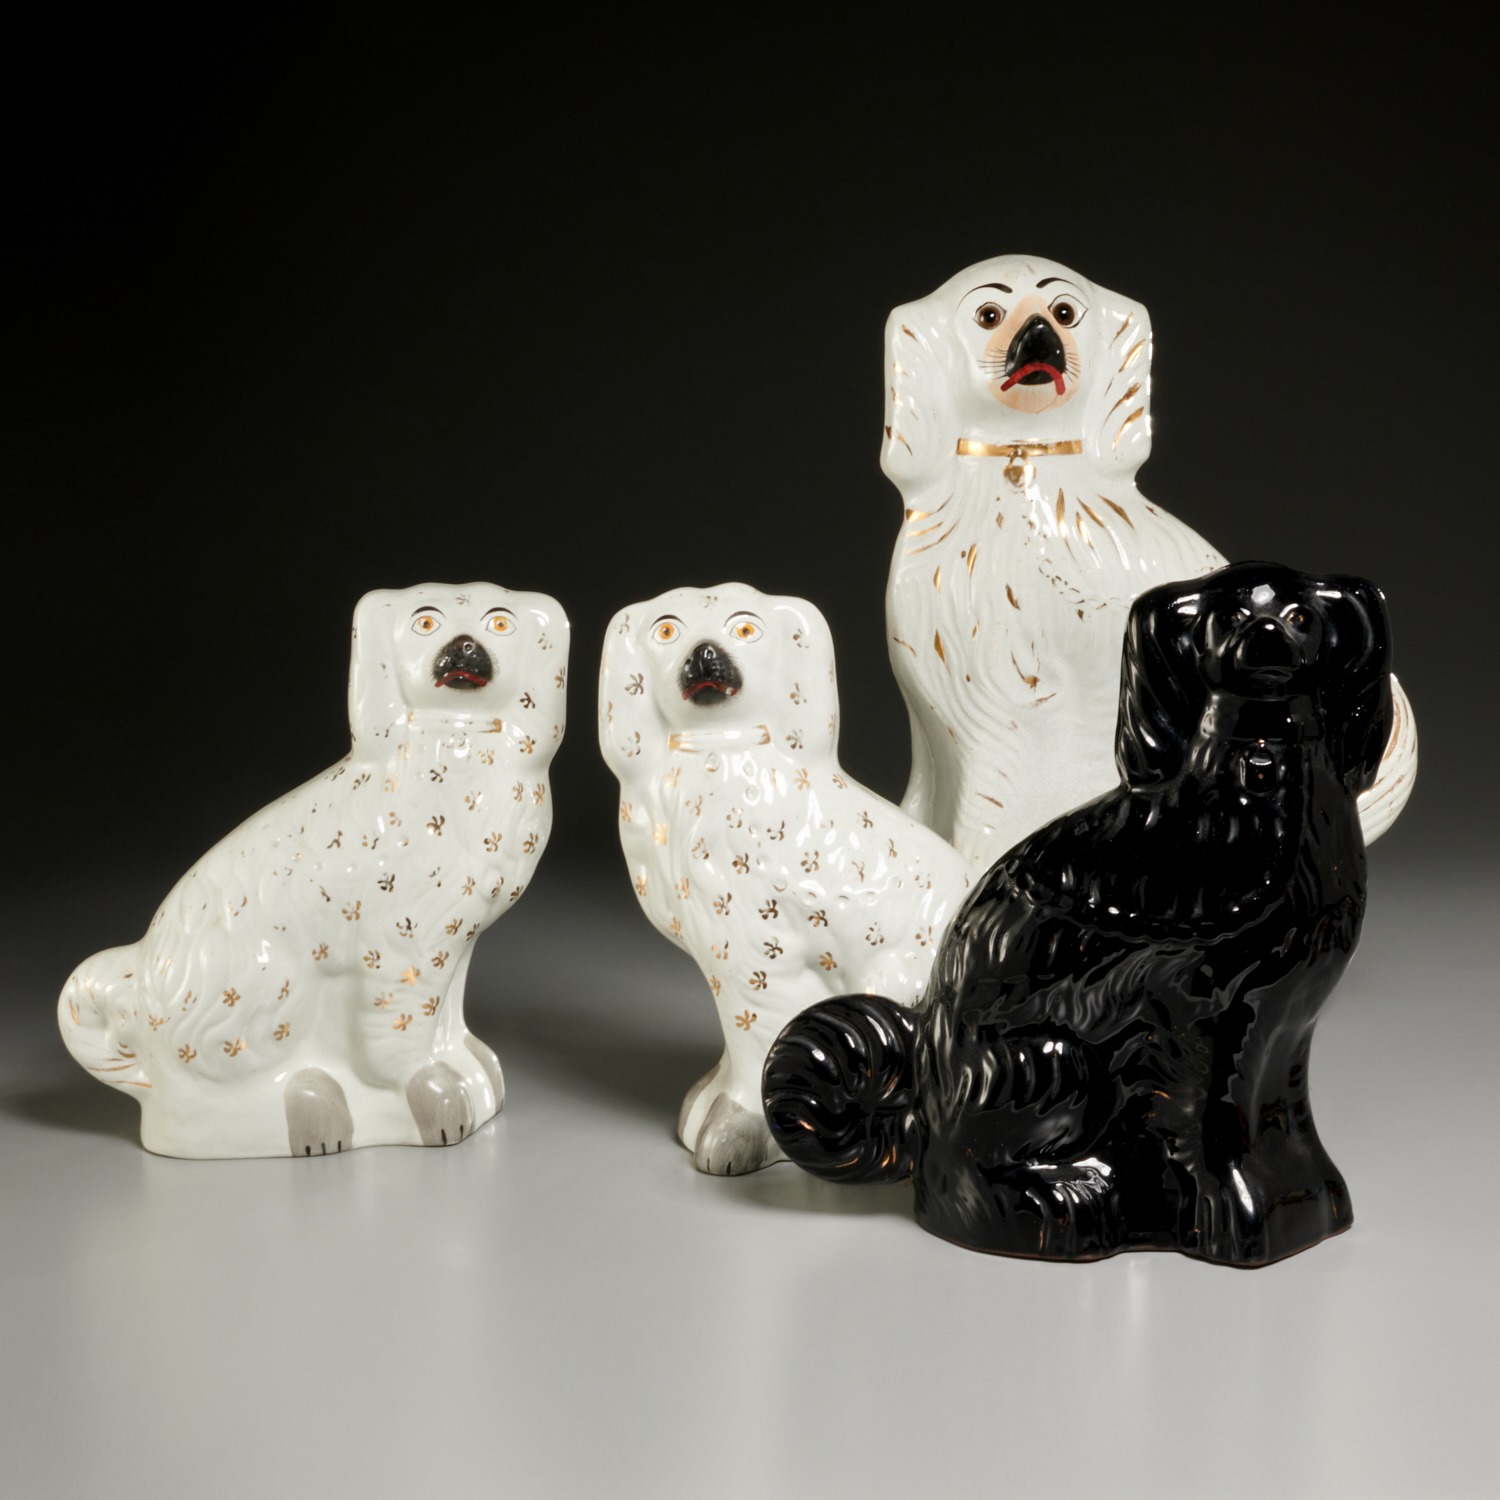 (4) LARGE STAFFORDSHIRE DOGS 19th